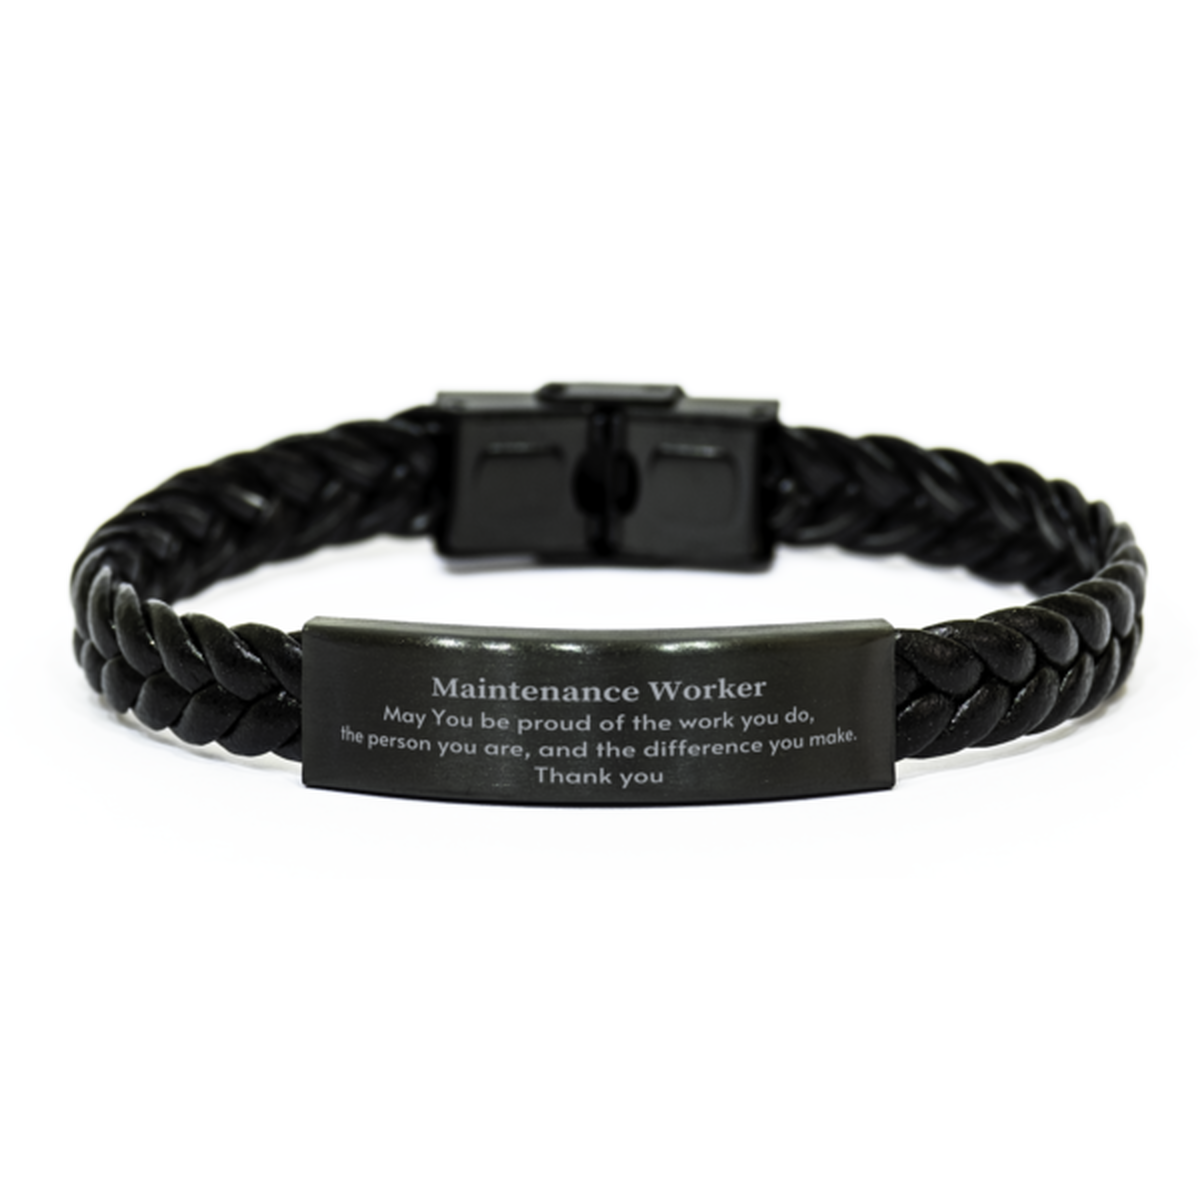 Heartwarming Braided Leather Bracelet Retirement Coworkers Gifts for Maintenance Worker, Maintenance Worker May You be proud of the work you do, the person you are Gifts for Boss Men Women Friends